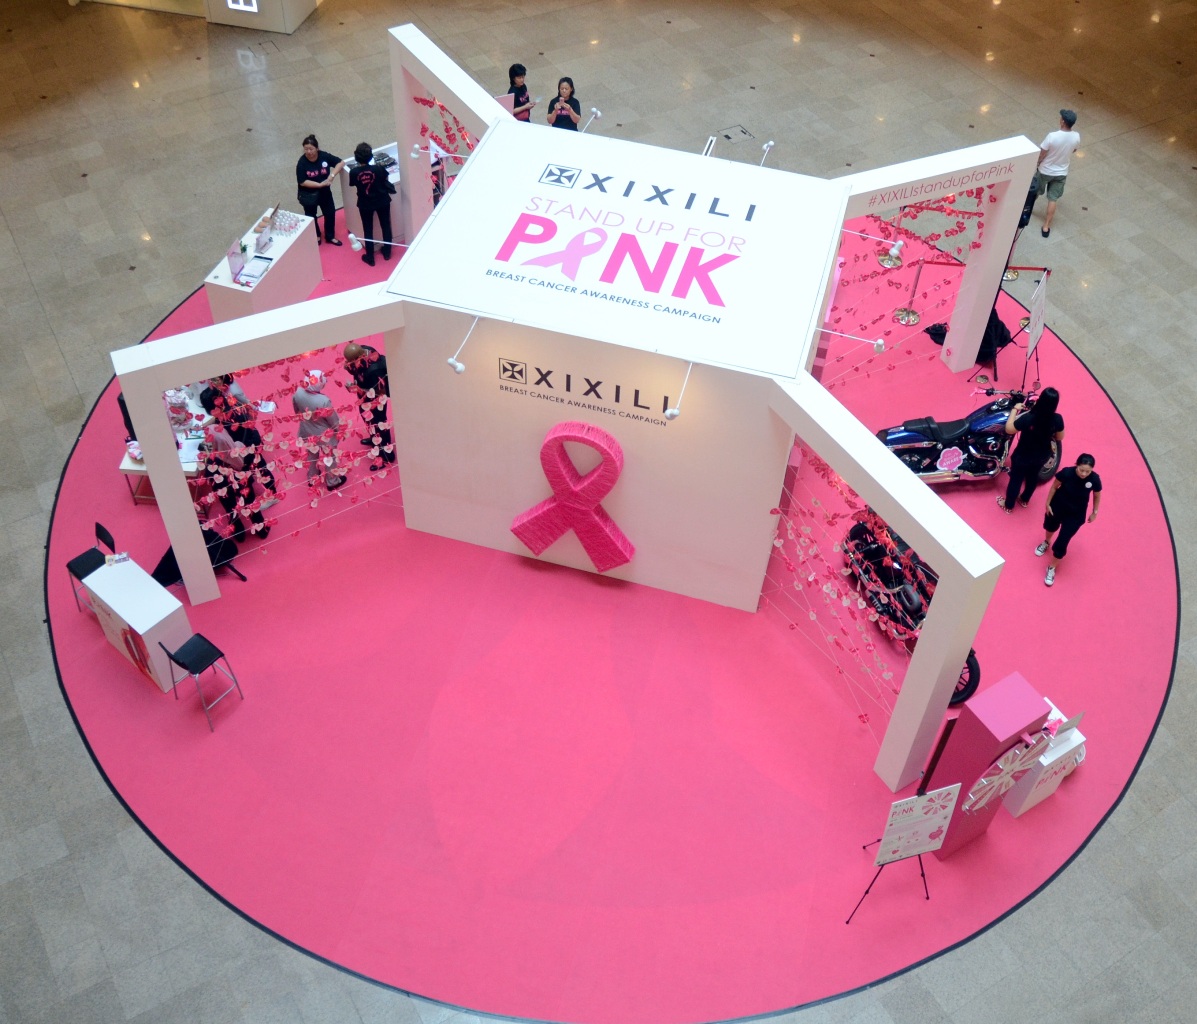 A Pink Ribbon art sculpture made of entwined yarn was erected to signify the communal bond and support for and amongst women diagnosed with breast cancer. 